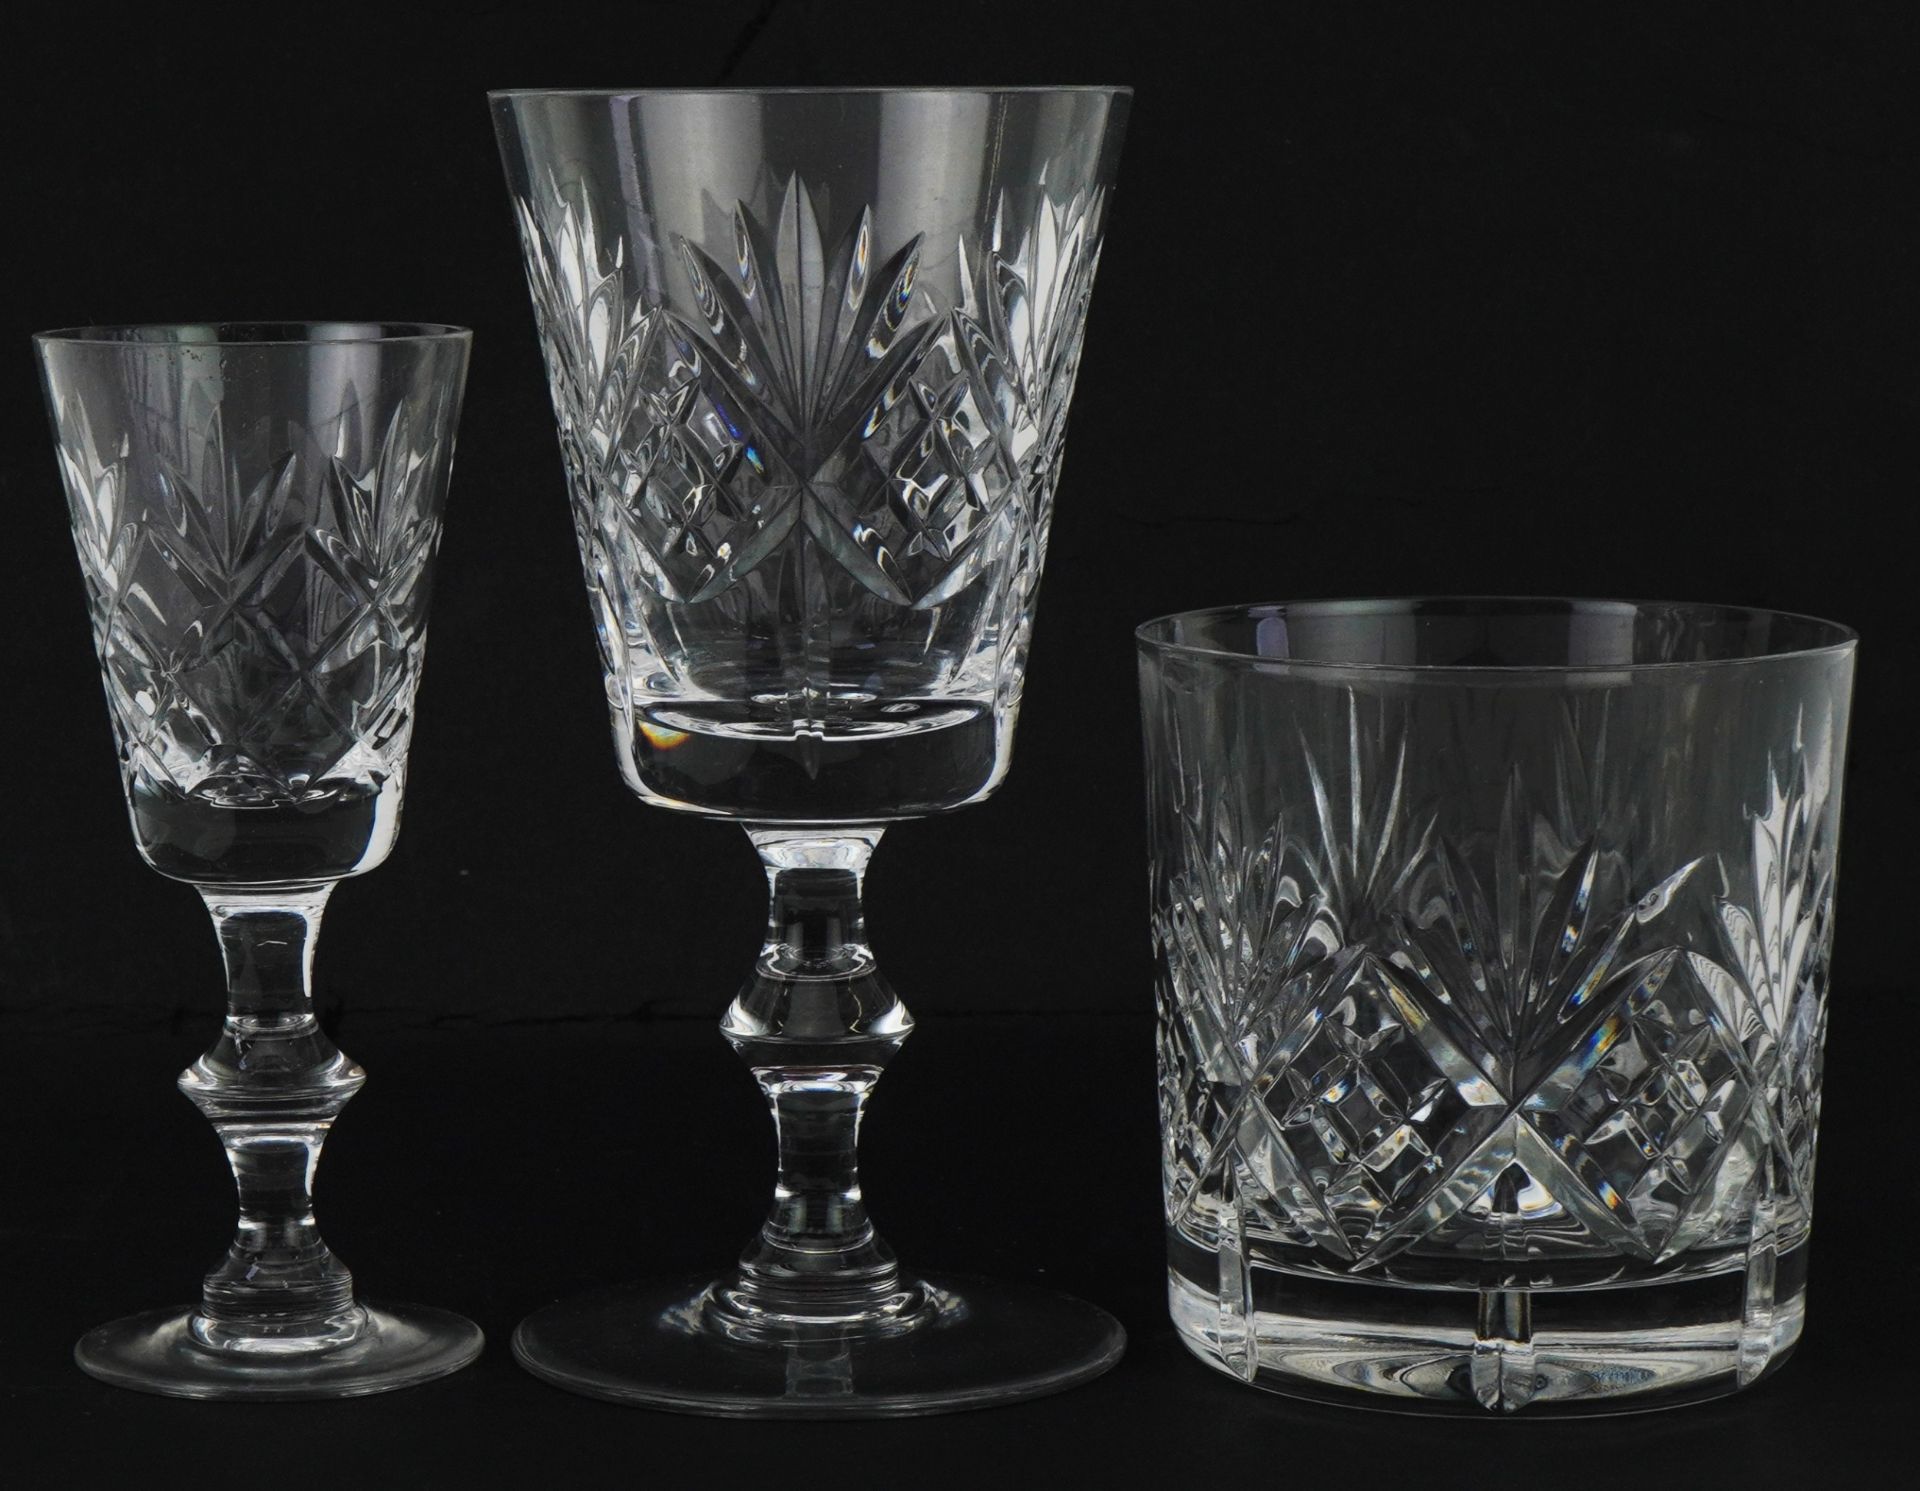 Edinburgh Crystal glassware boxed sets including set of six tumblers and set of six sherry glasses - Image 5 of 7